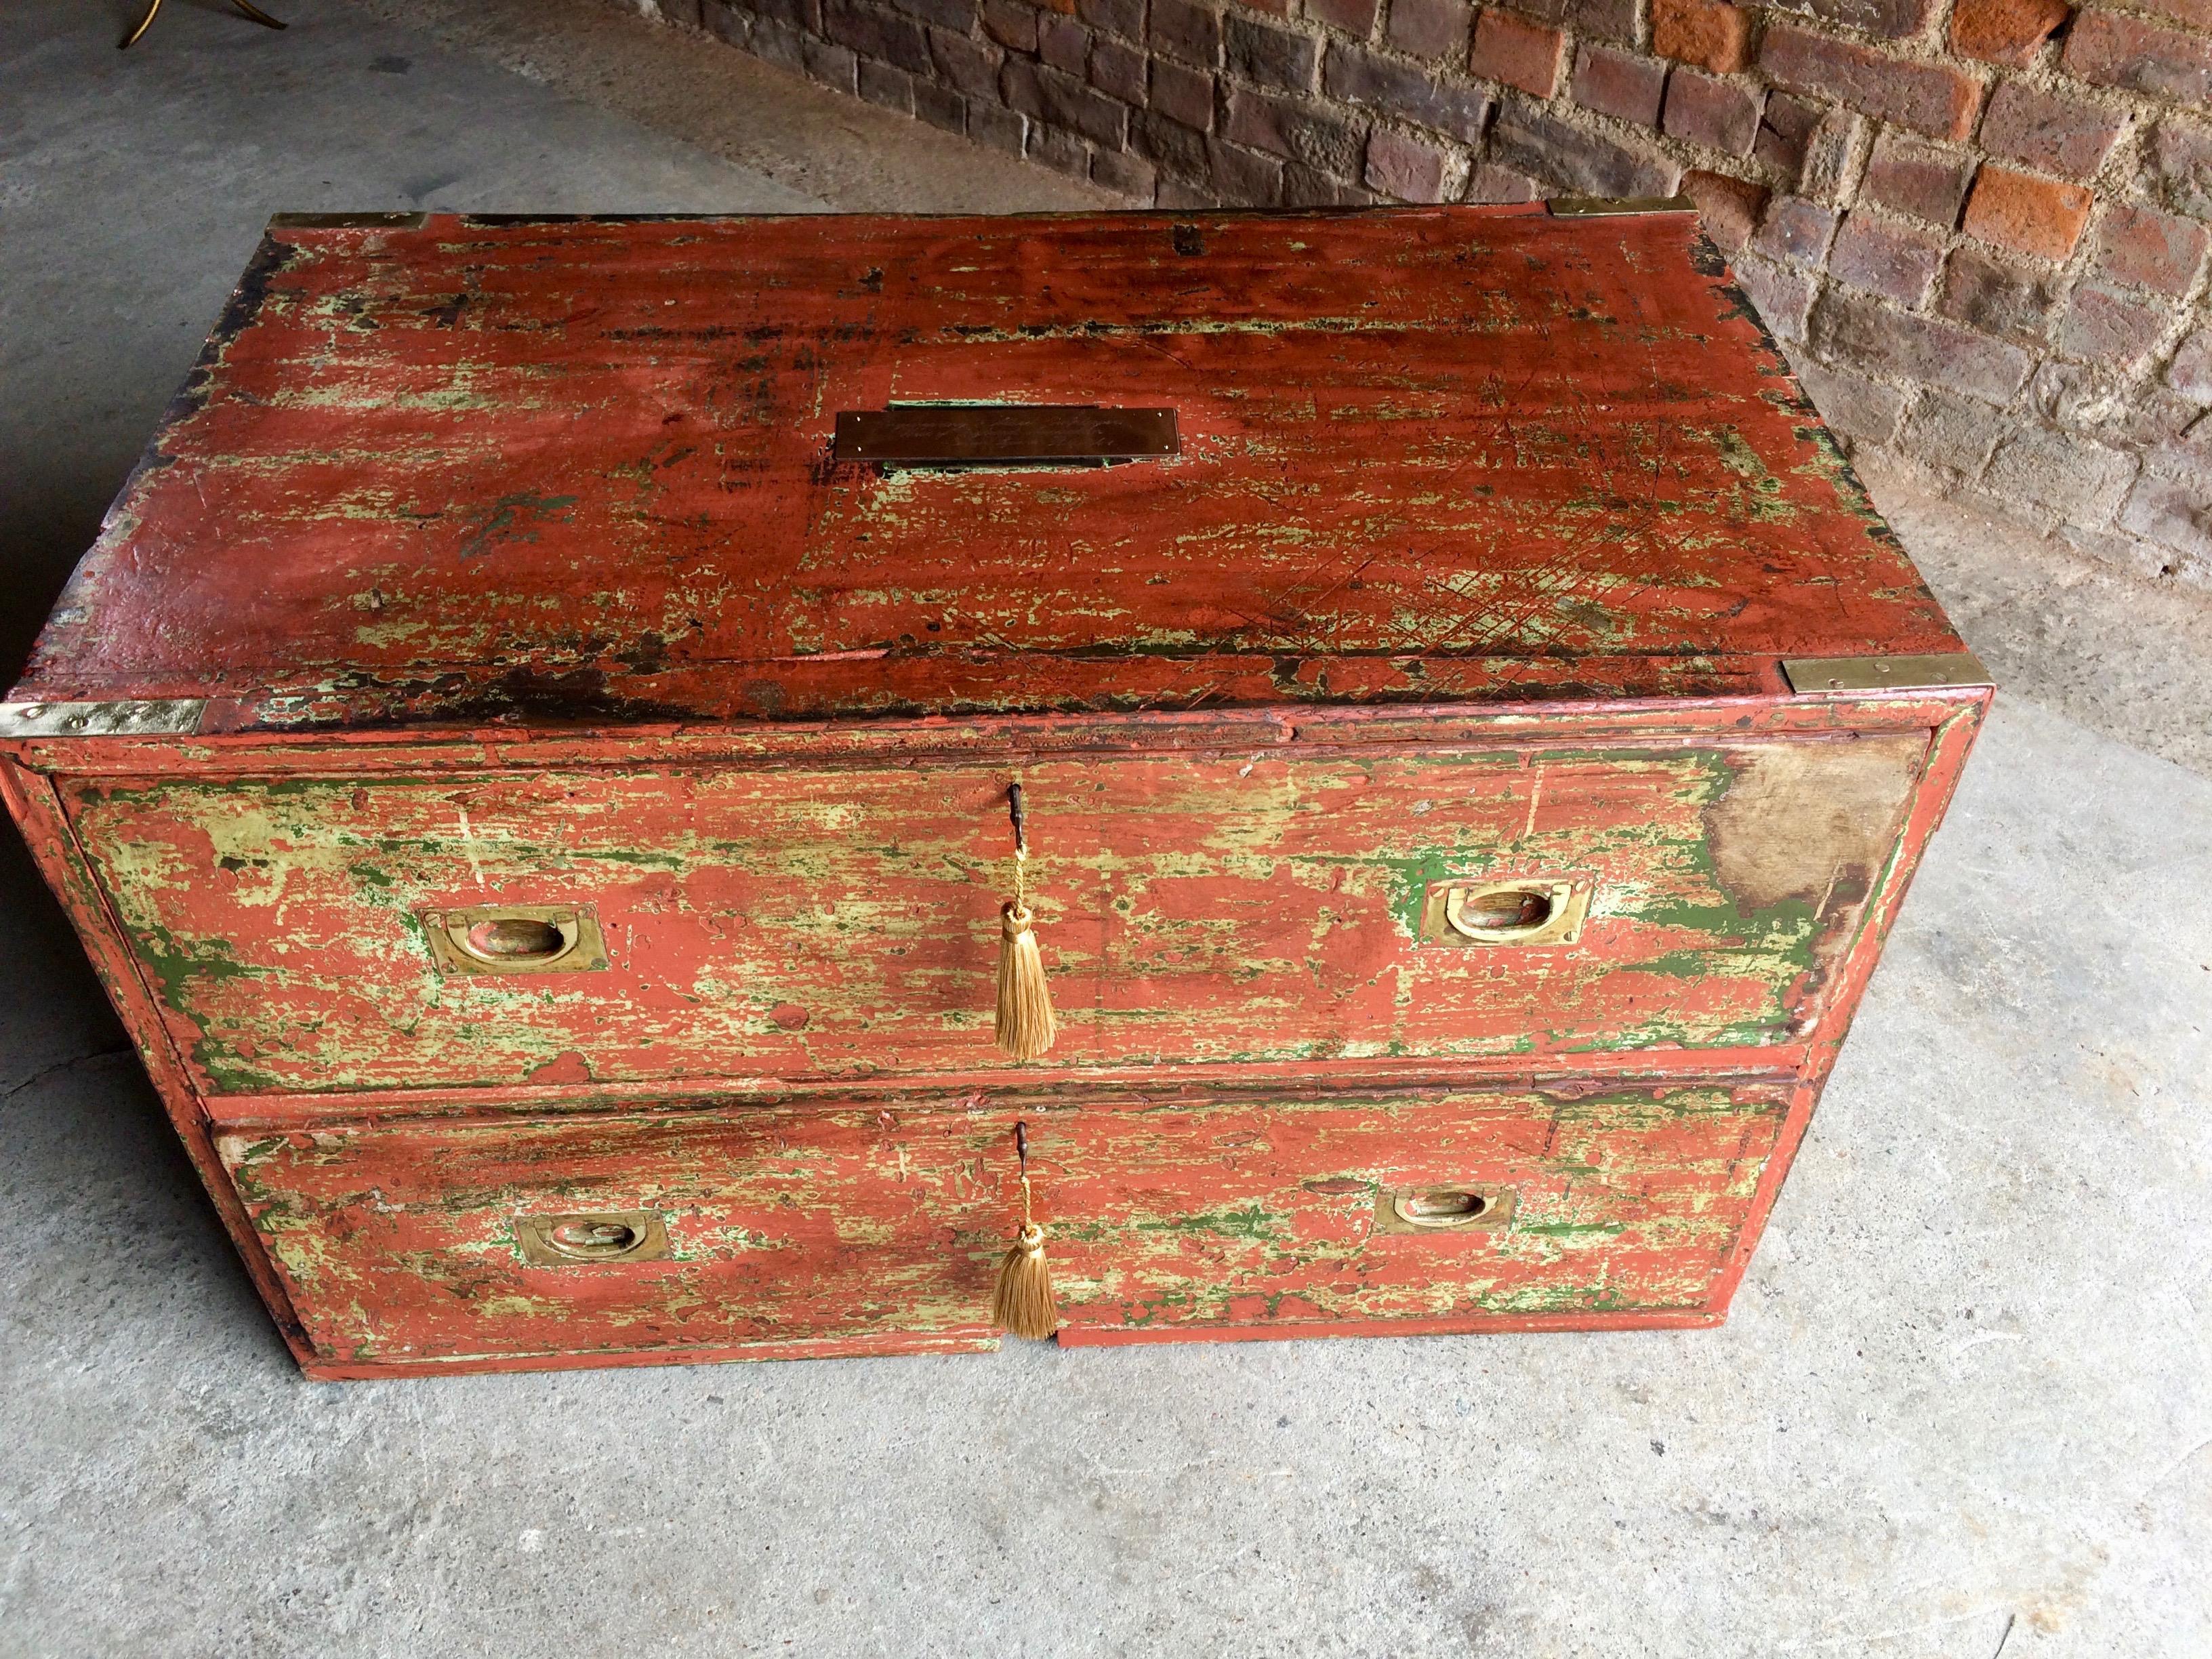 Mahogany Antique Campaign Chest of Drawers Coffee Table Distressed Painted Victorian